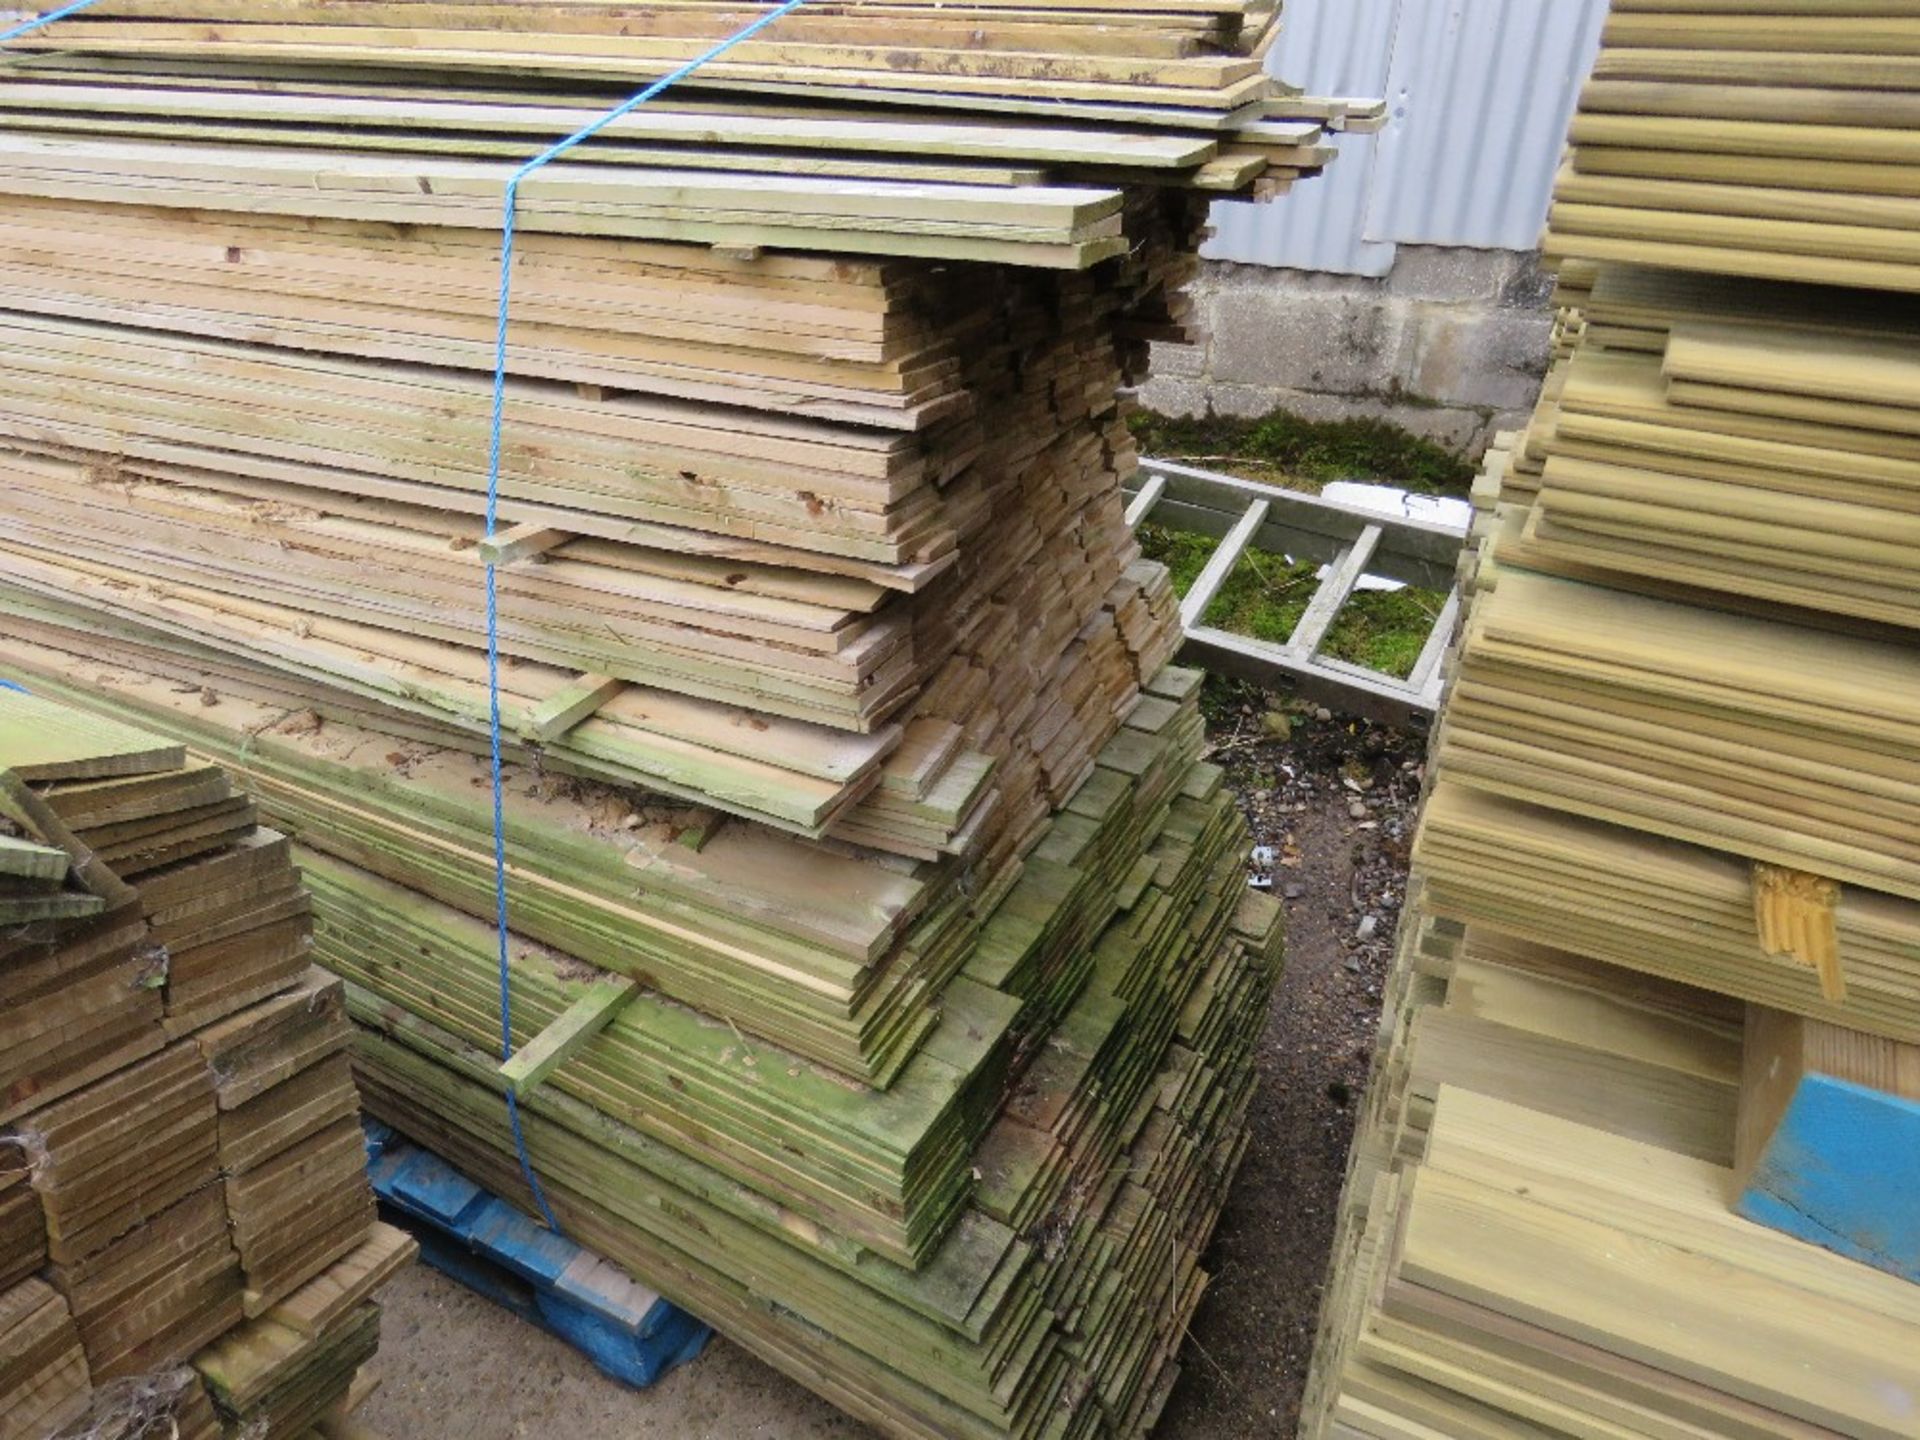 LARGE PACK OF TREATED FEATHER EDGE TIMBER CLADDING BOARDS, 1.79M LENGTH X 10CM WIDTH APPROX. - Image 2 of 5